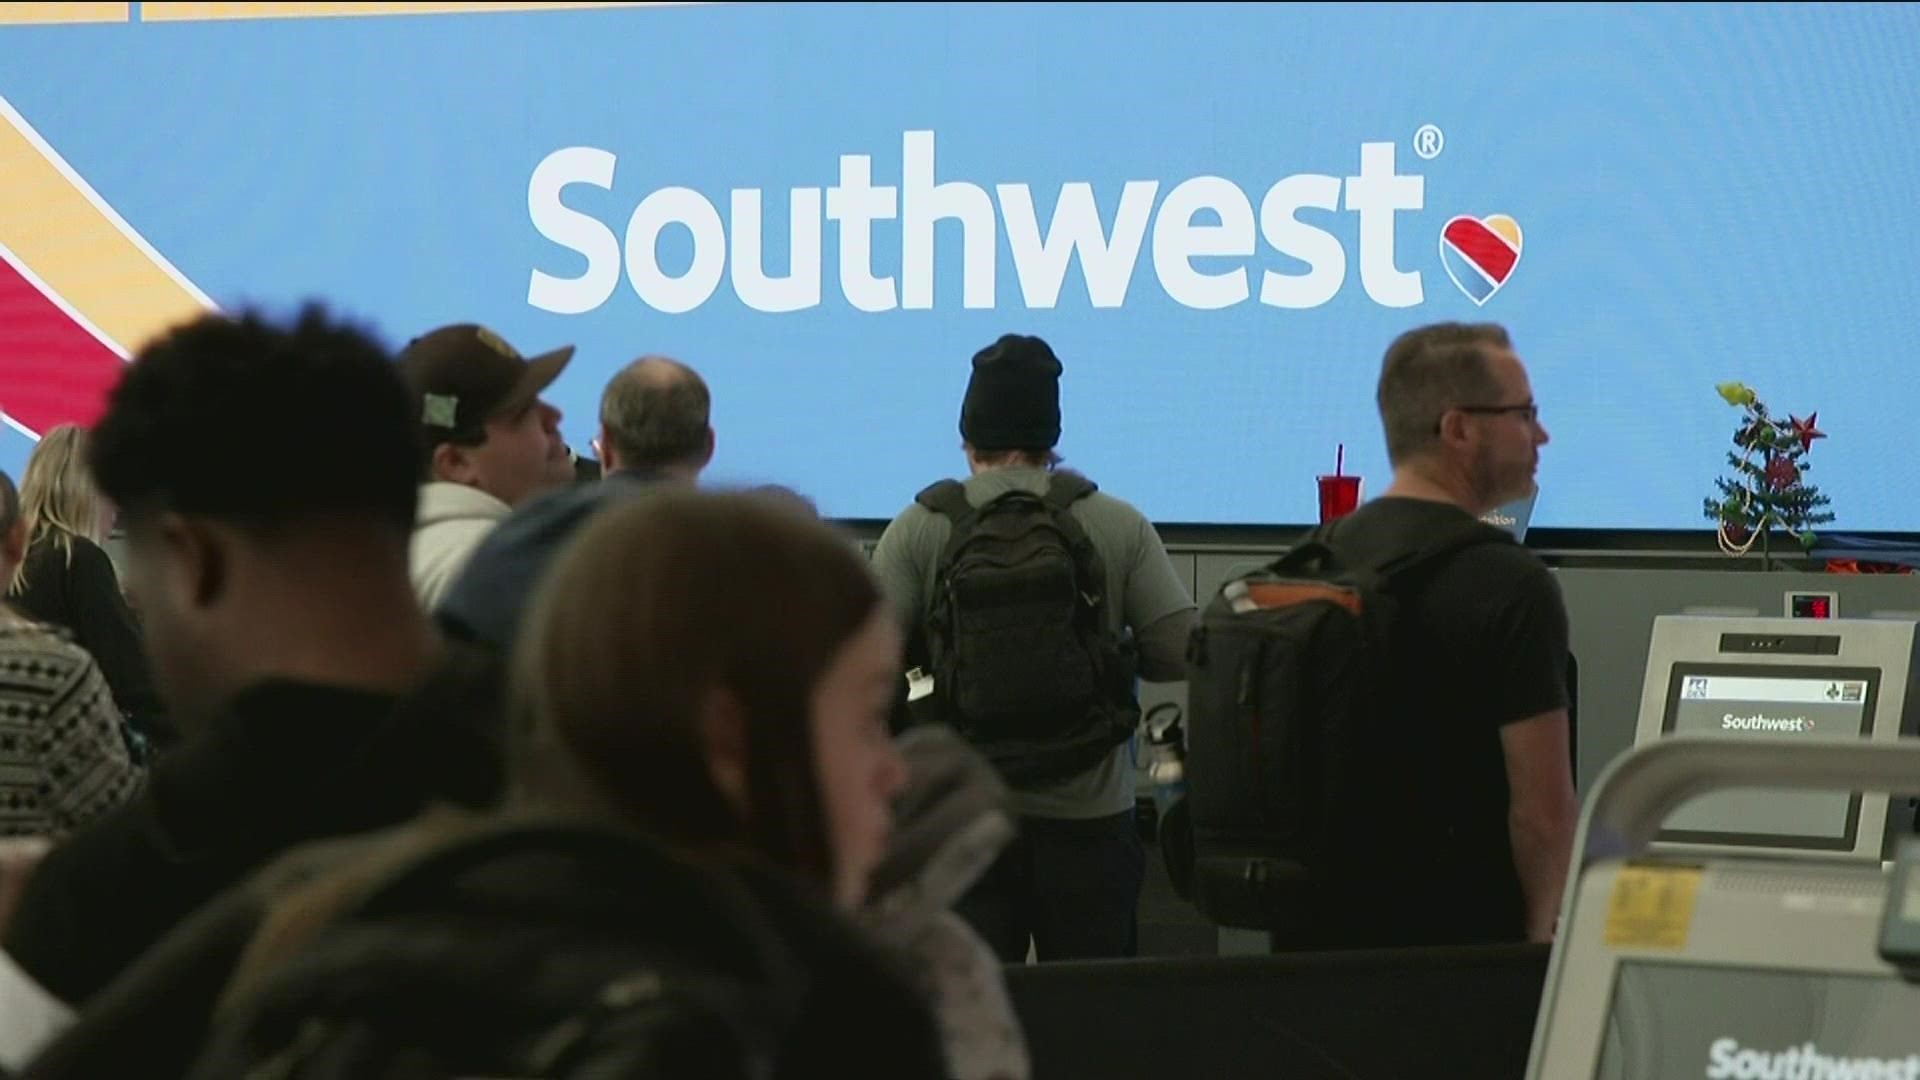 The airline has hired an aviation consulting firm to do an assessment on what happened during the holiday chaos and ways to prevent it from happening again.